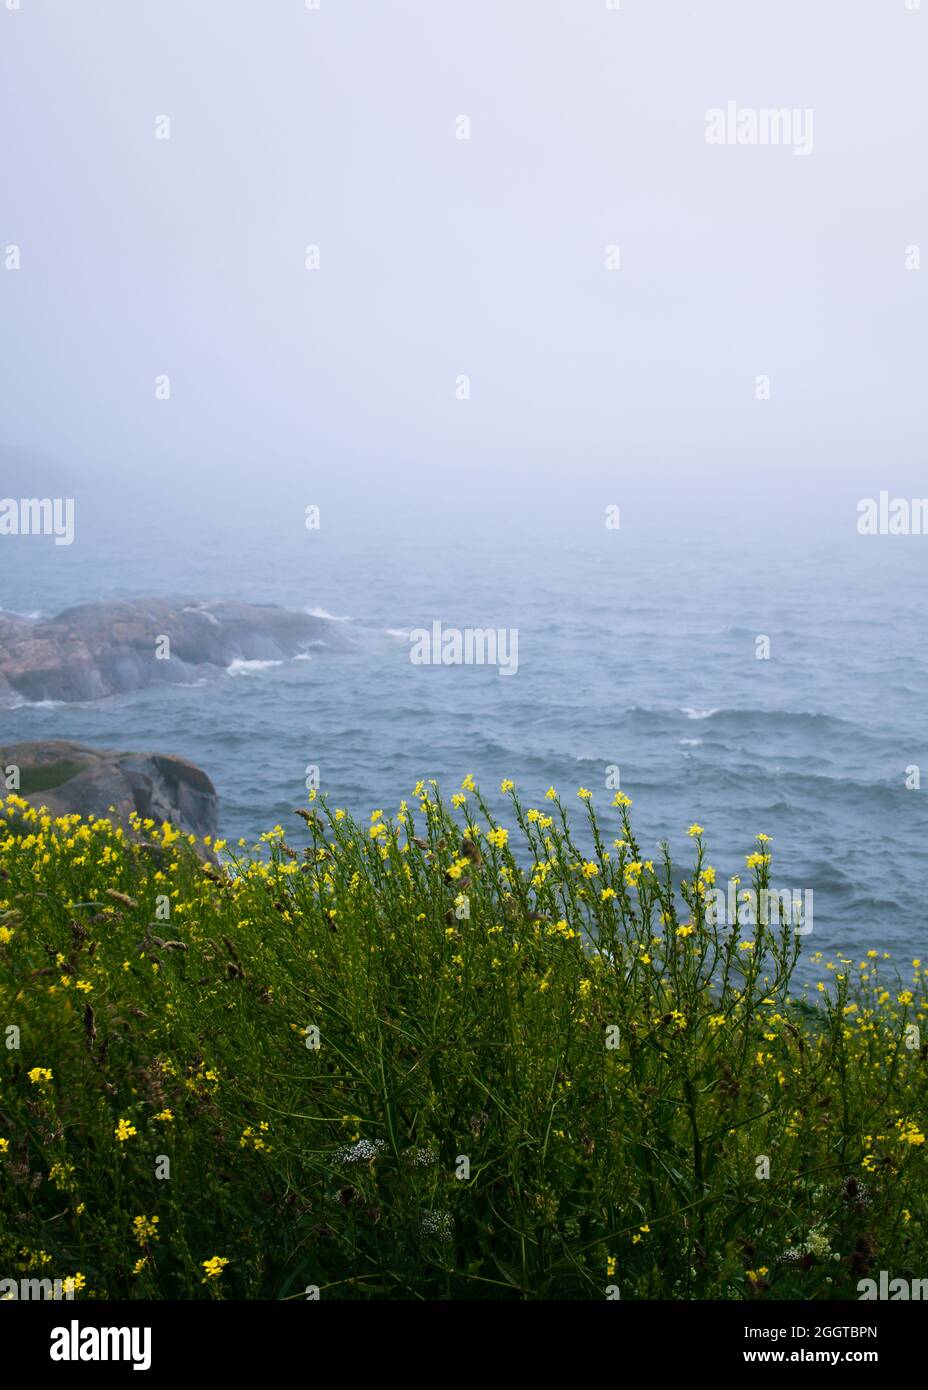 Northern landscape - field of yellow wild flowers up on a cliff by a foggy sea. Stock Photo